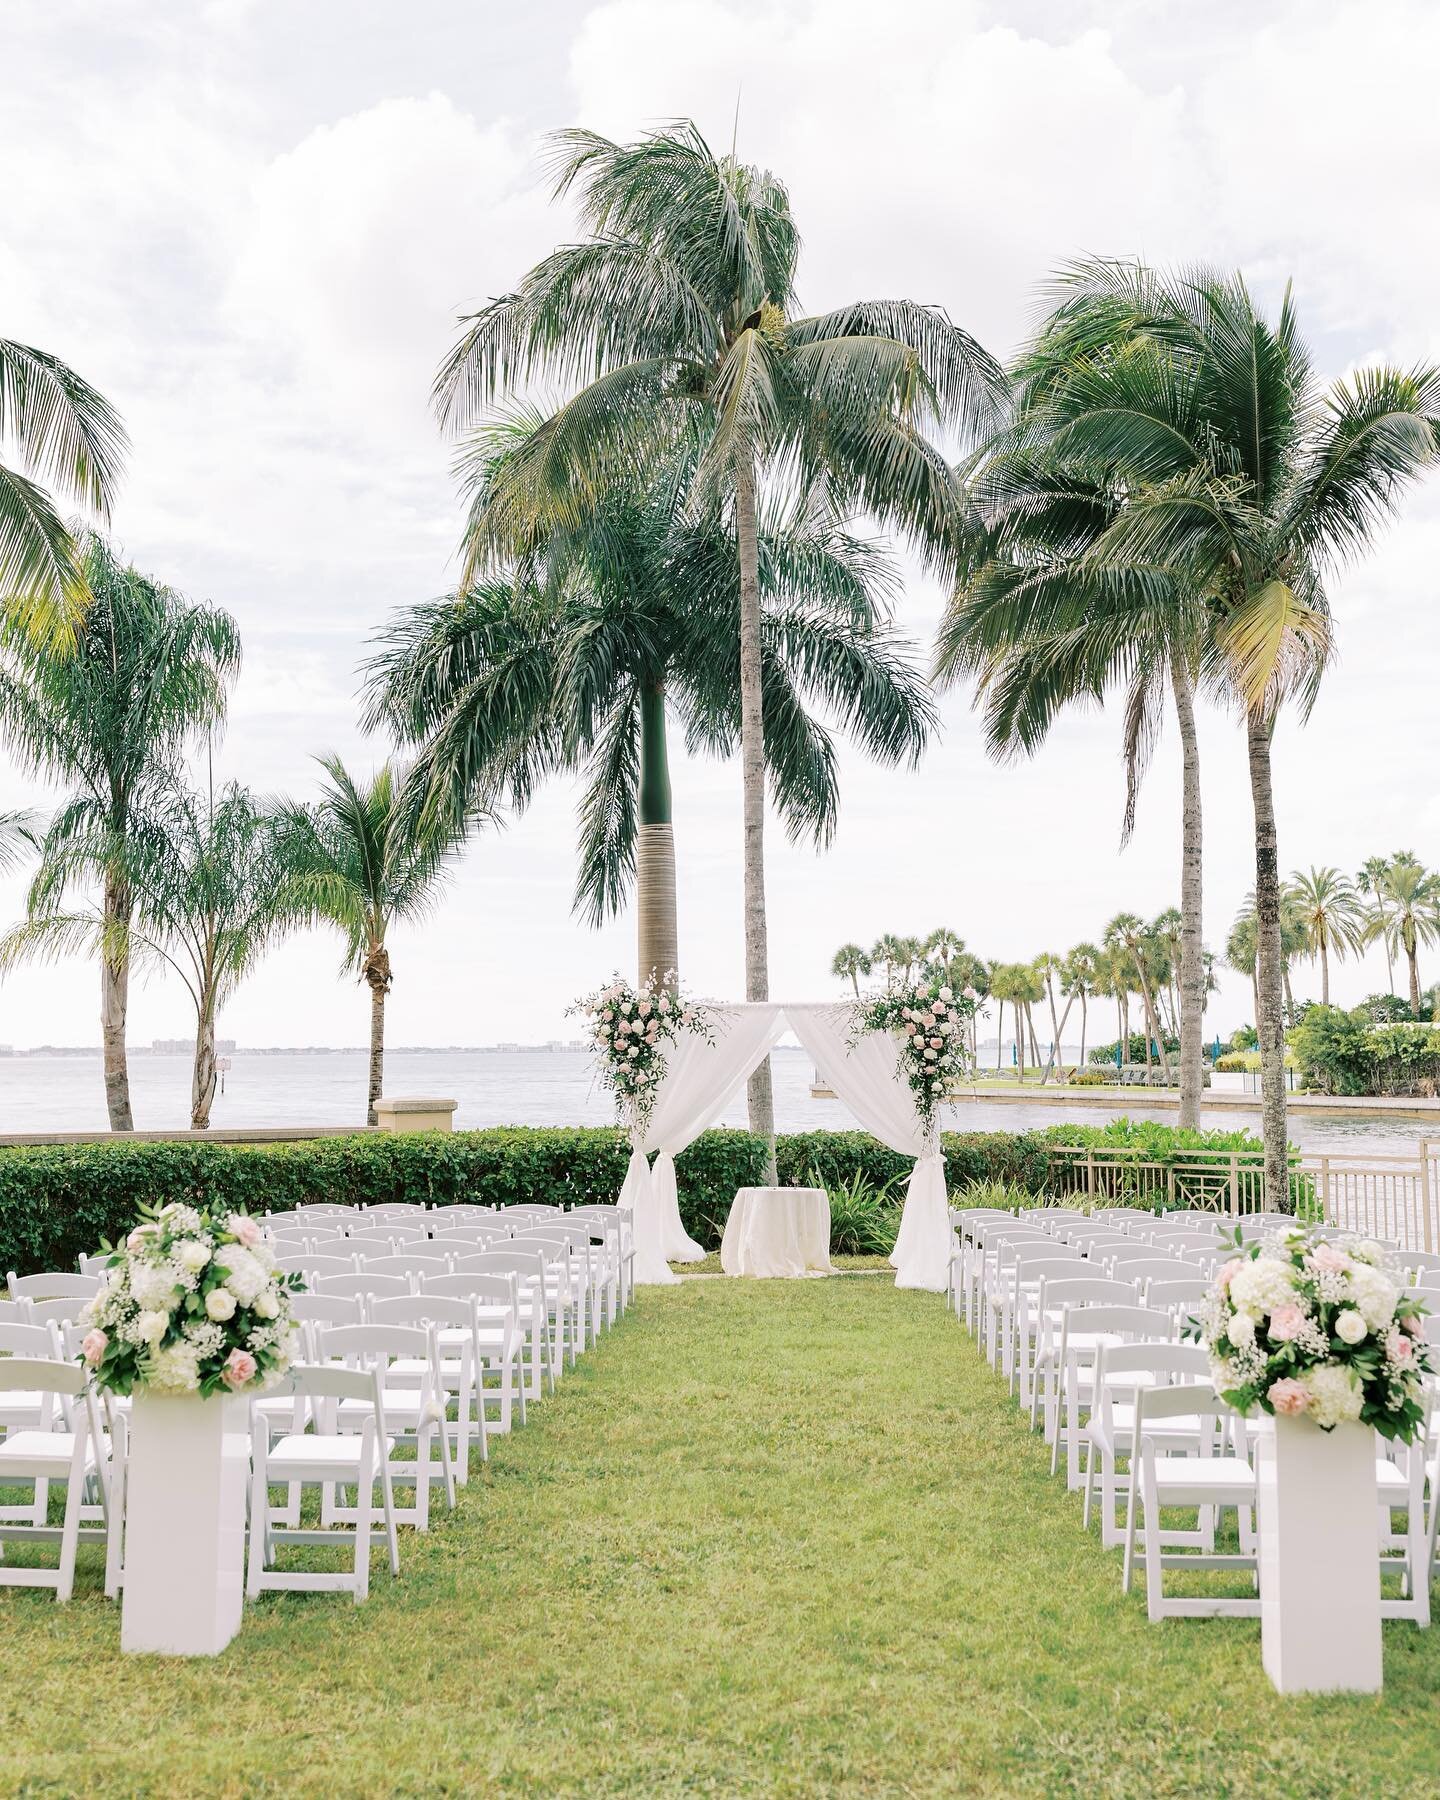 It's easy to see why Florida is such a desirable place for destination weddings! Backdrops like is one of the many reasons!